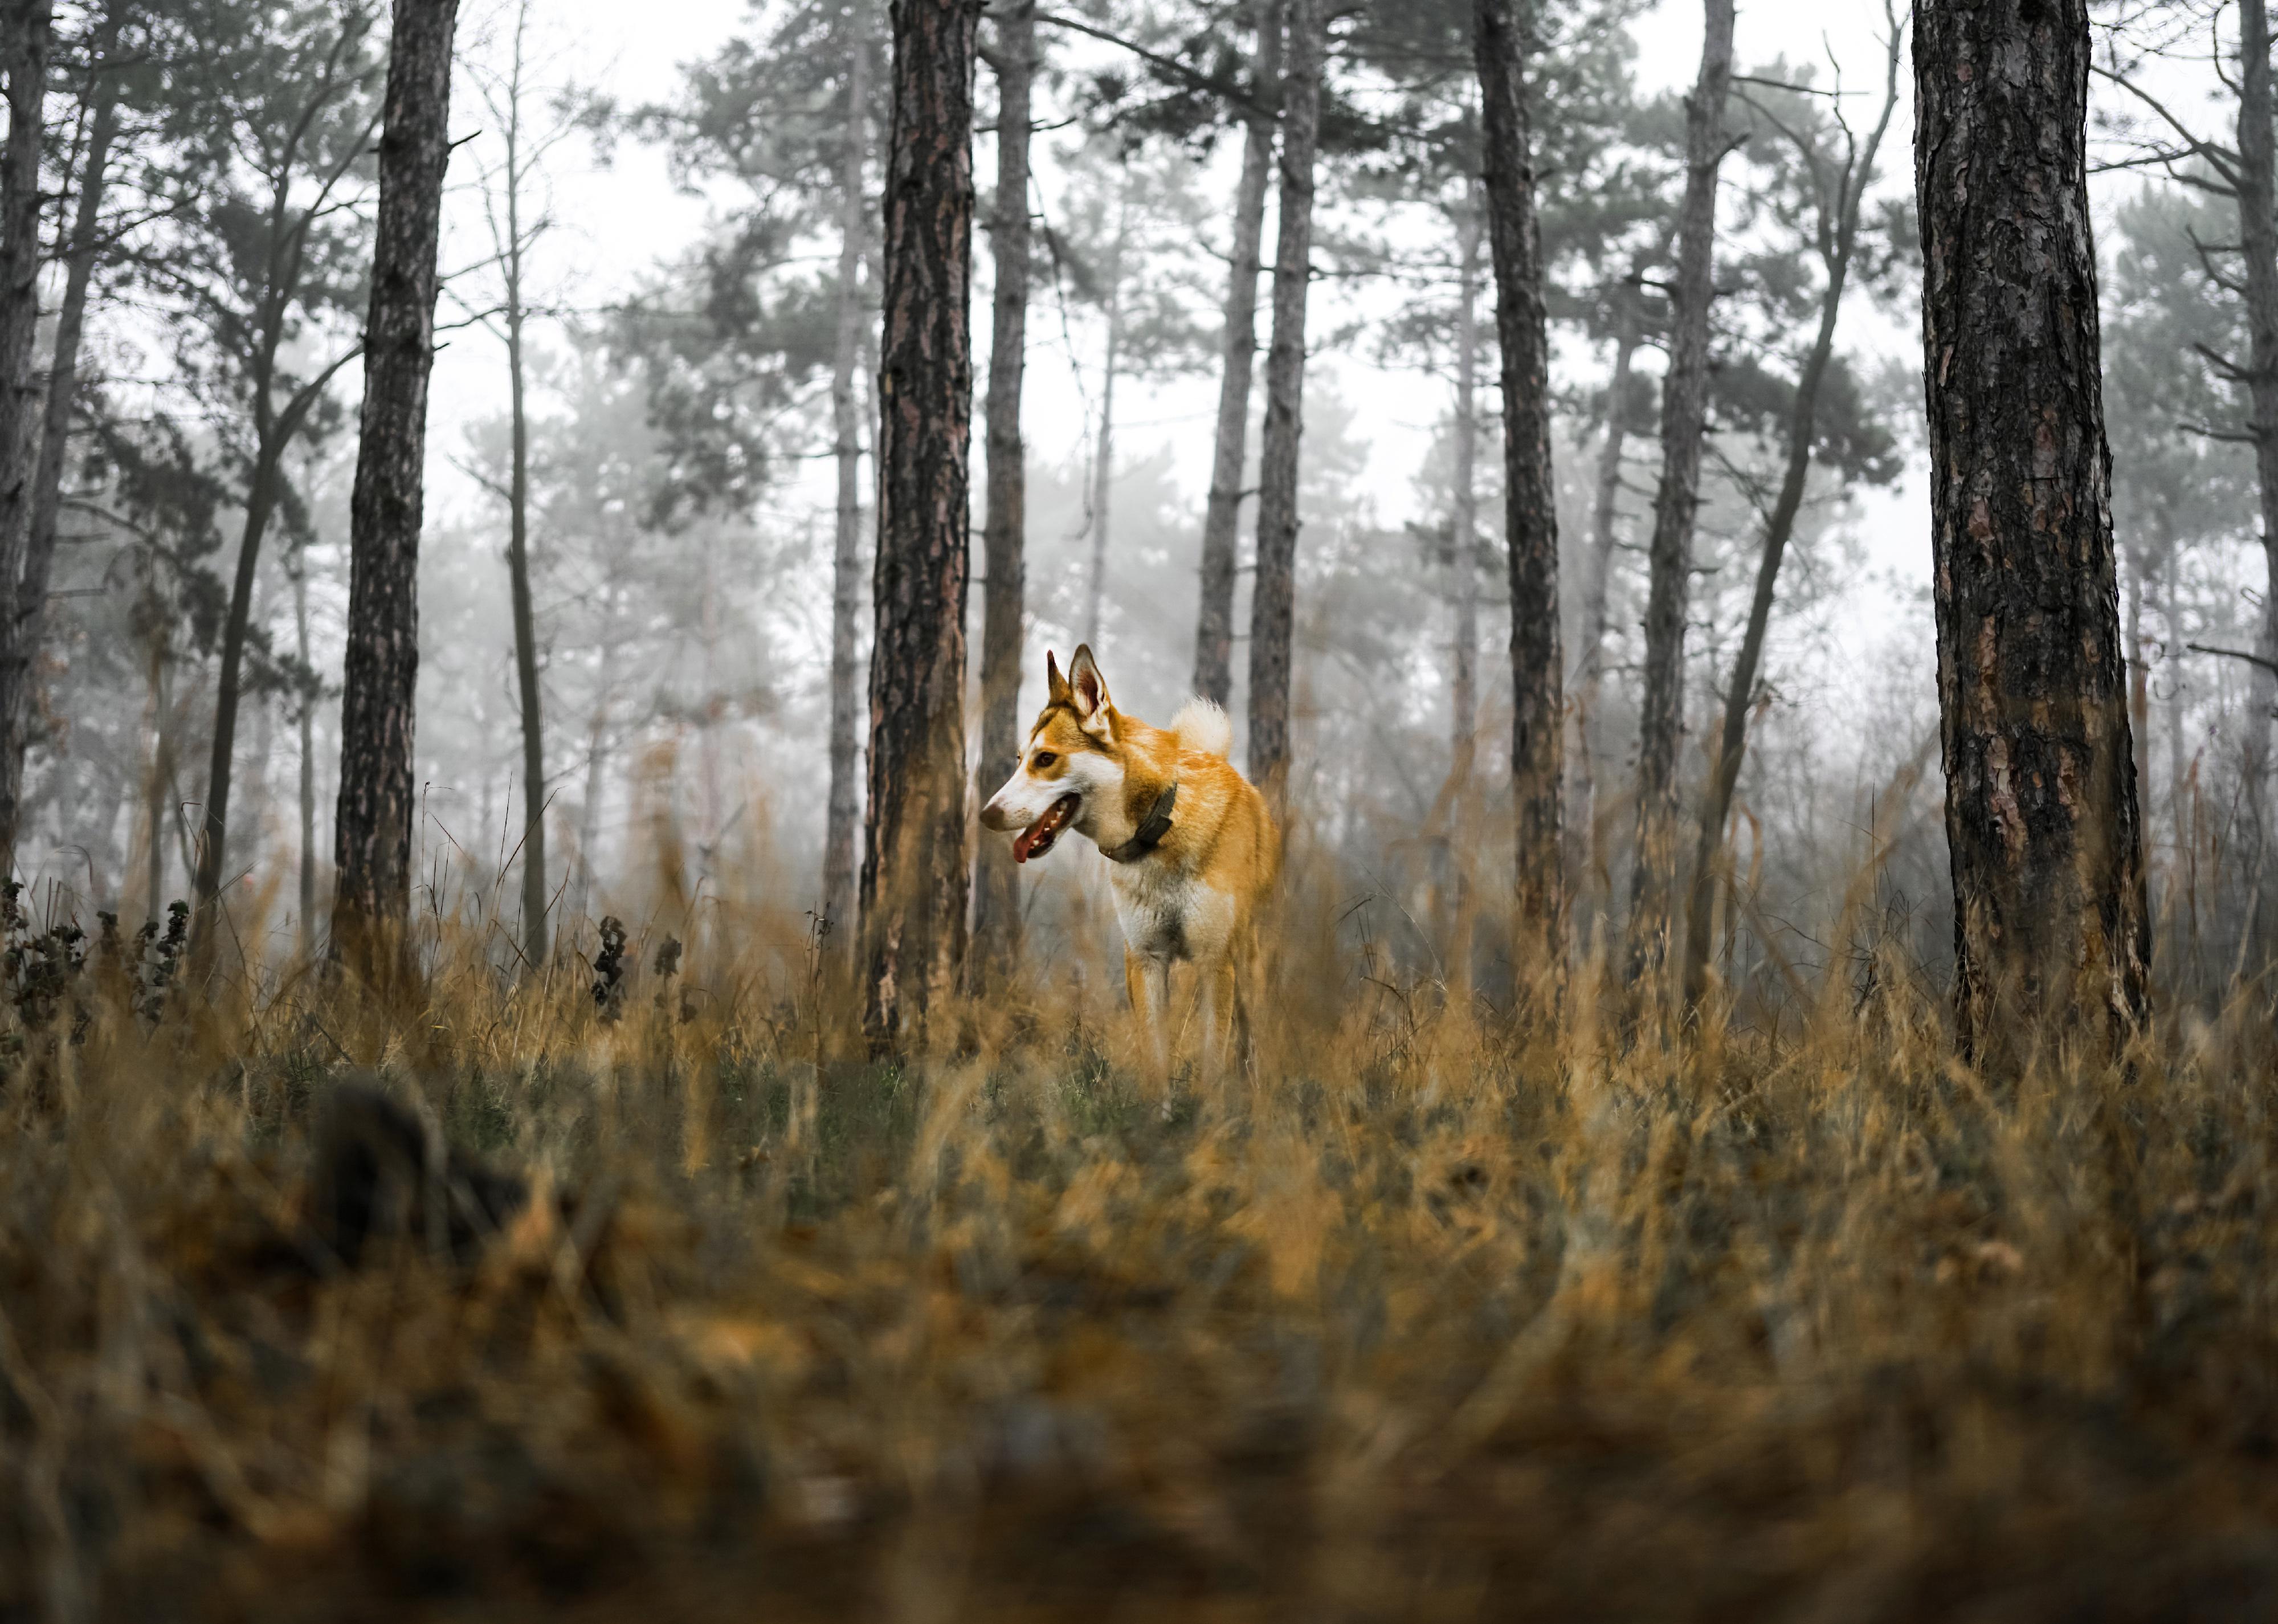 Norwegian lundehund plays in the forest.